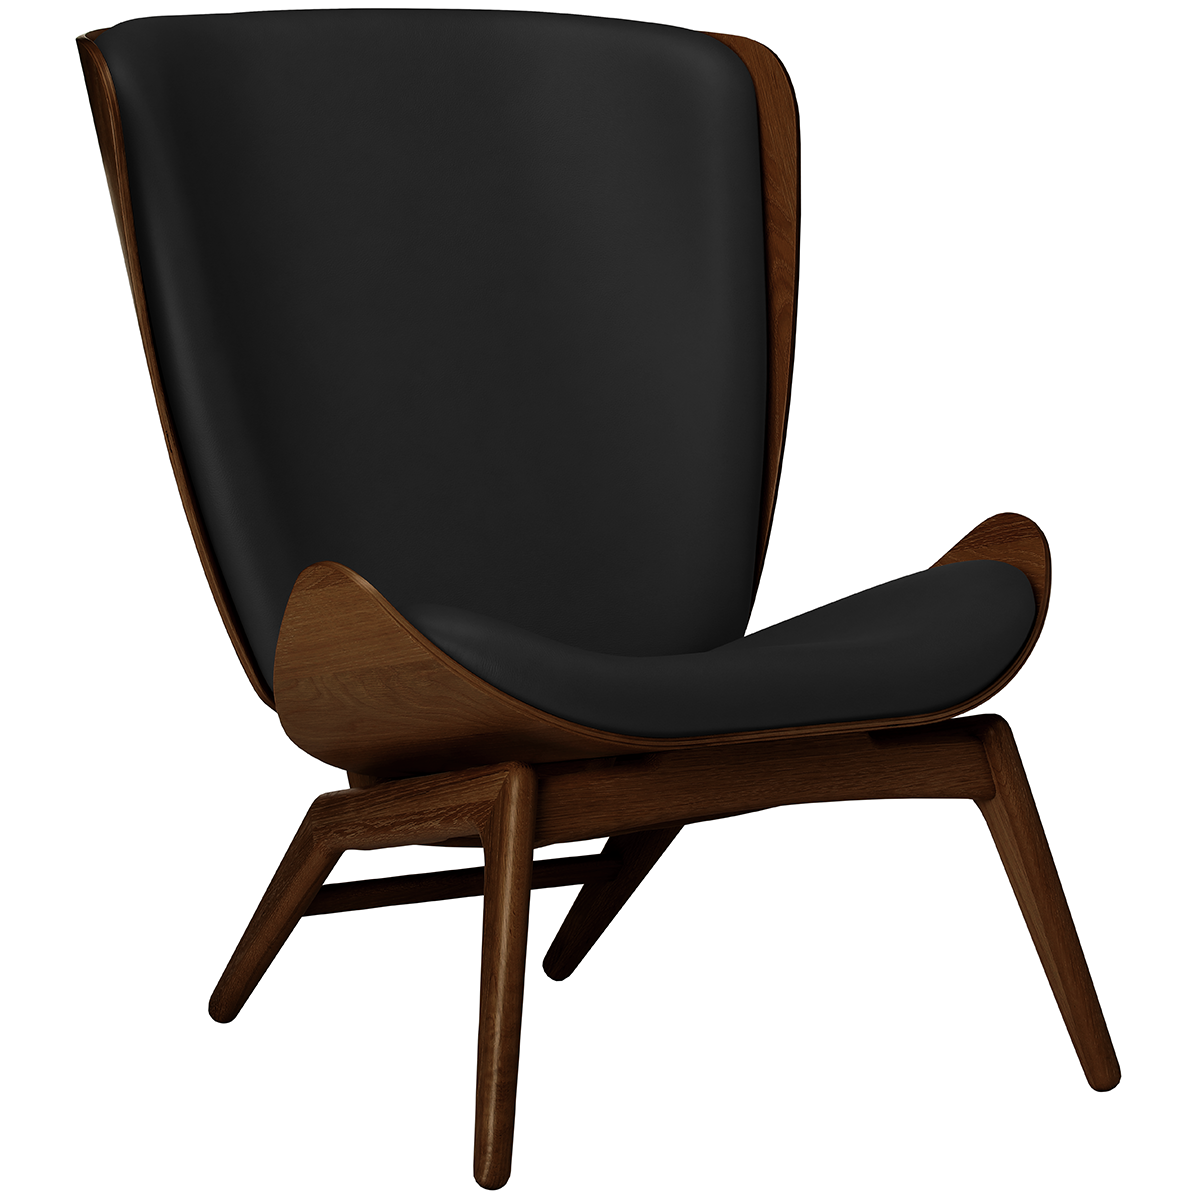 The Reader Leather Wing Chair